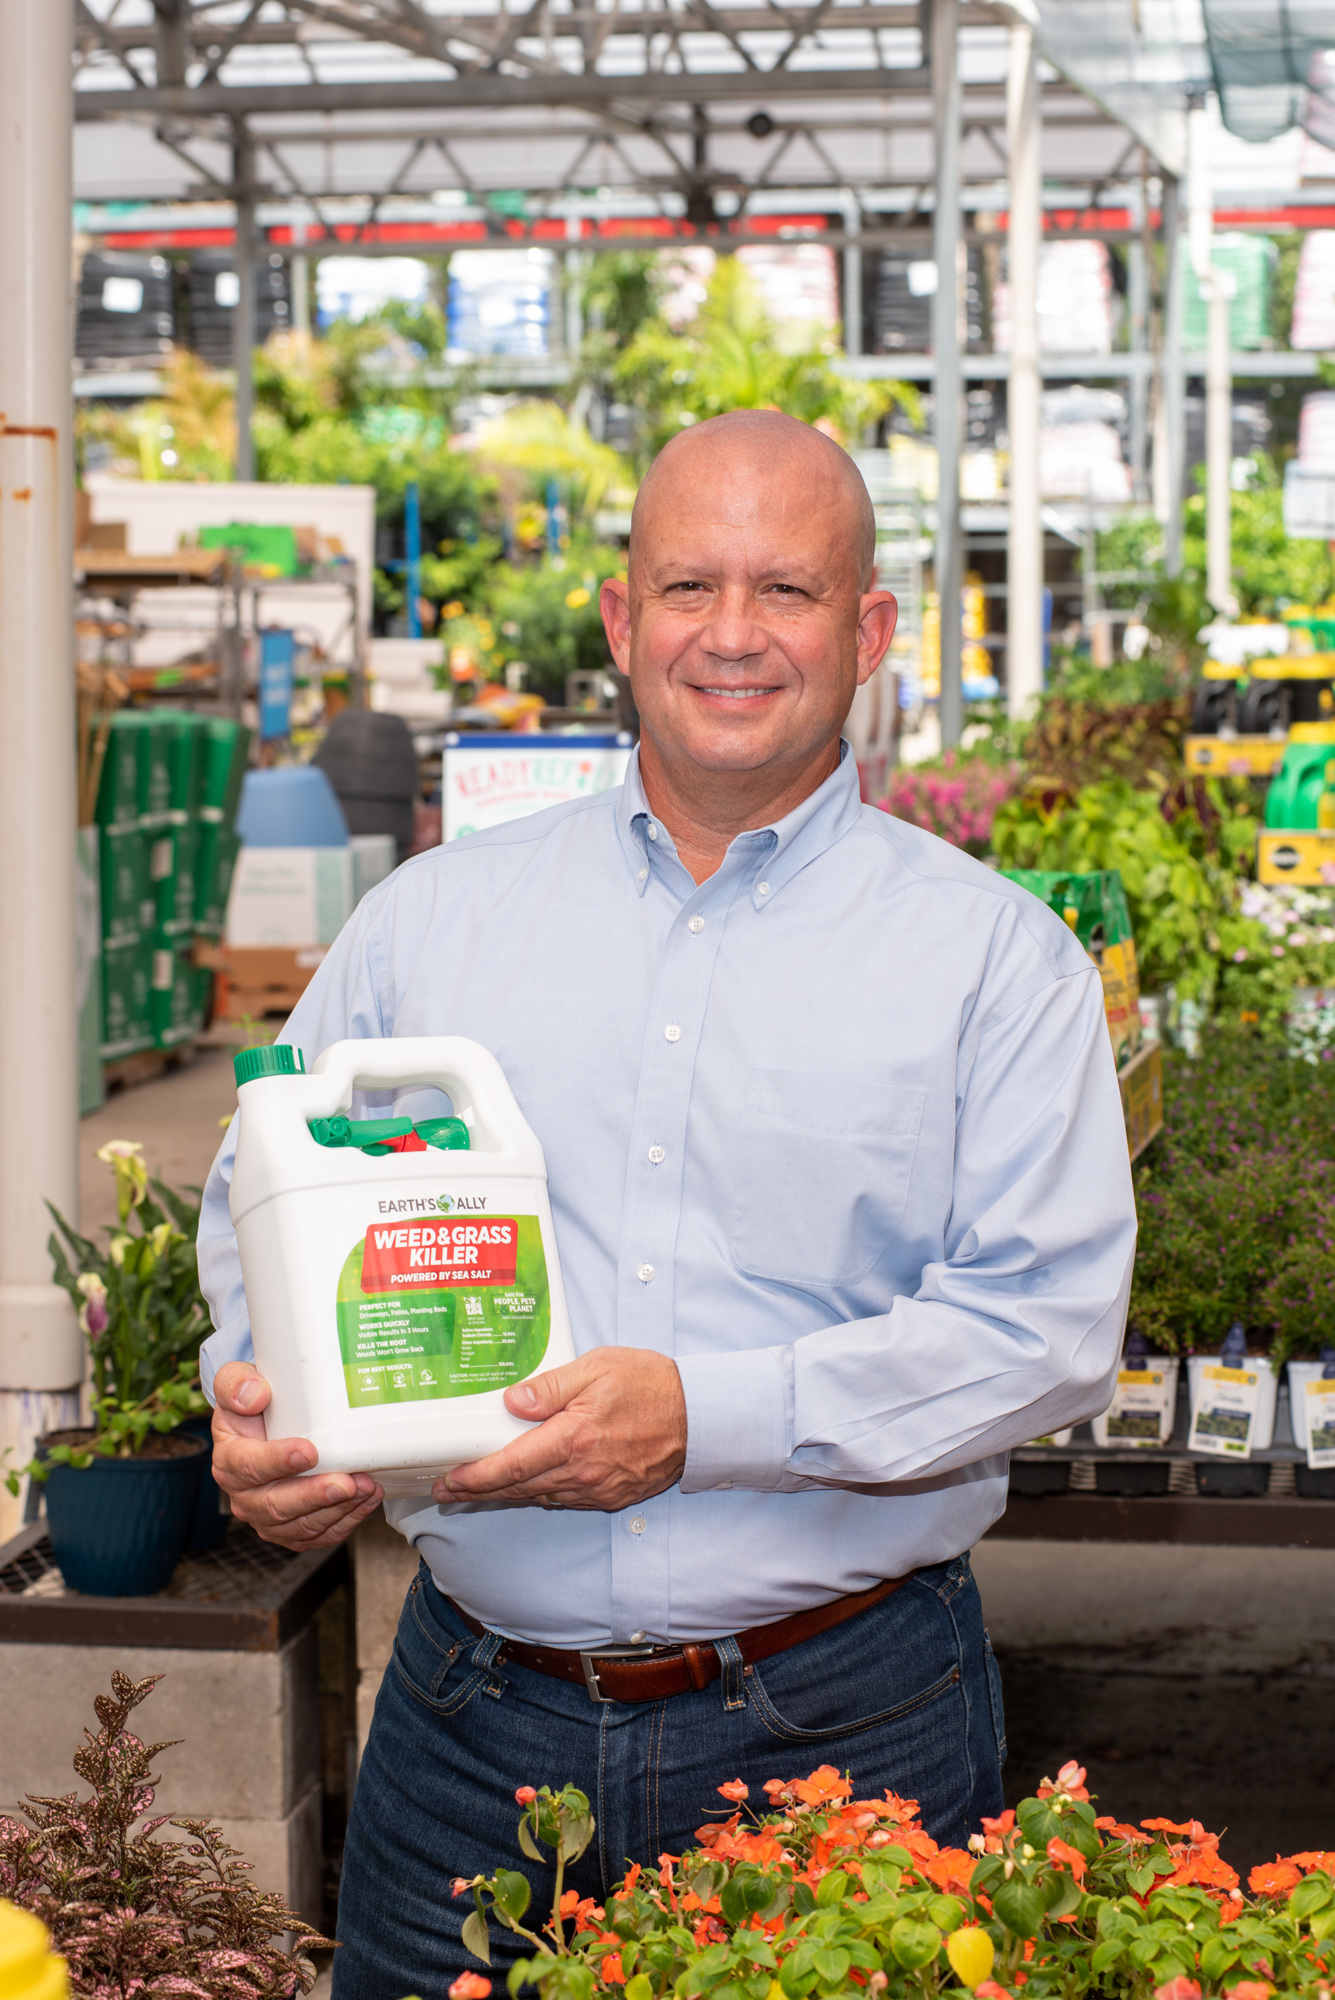 Lori Sax. Getting its Earth’s Ally line of nontoxic, organic and bee-safe gardening products into Lowe’s, says Scott Allshouse, is a “huge deal” for the company, Lakewood Ranch-based Sarasota Green Group.